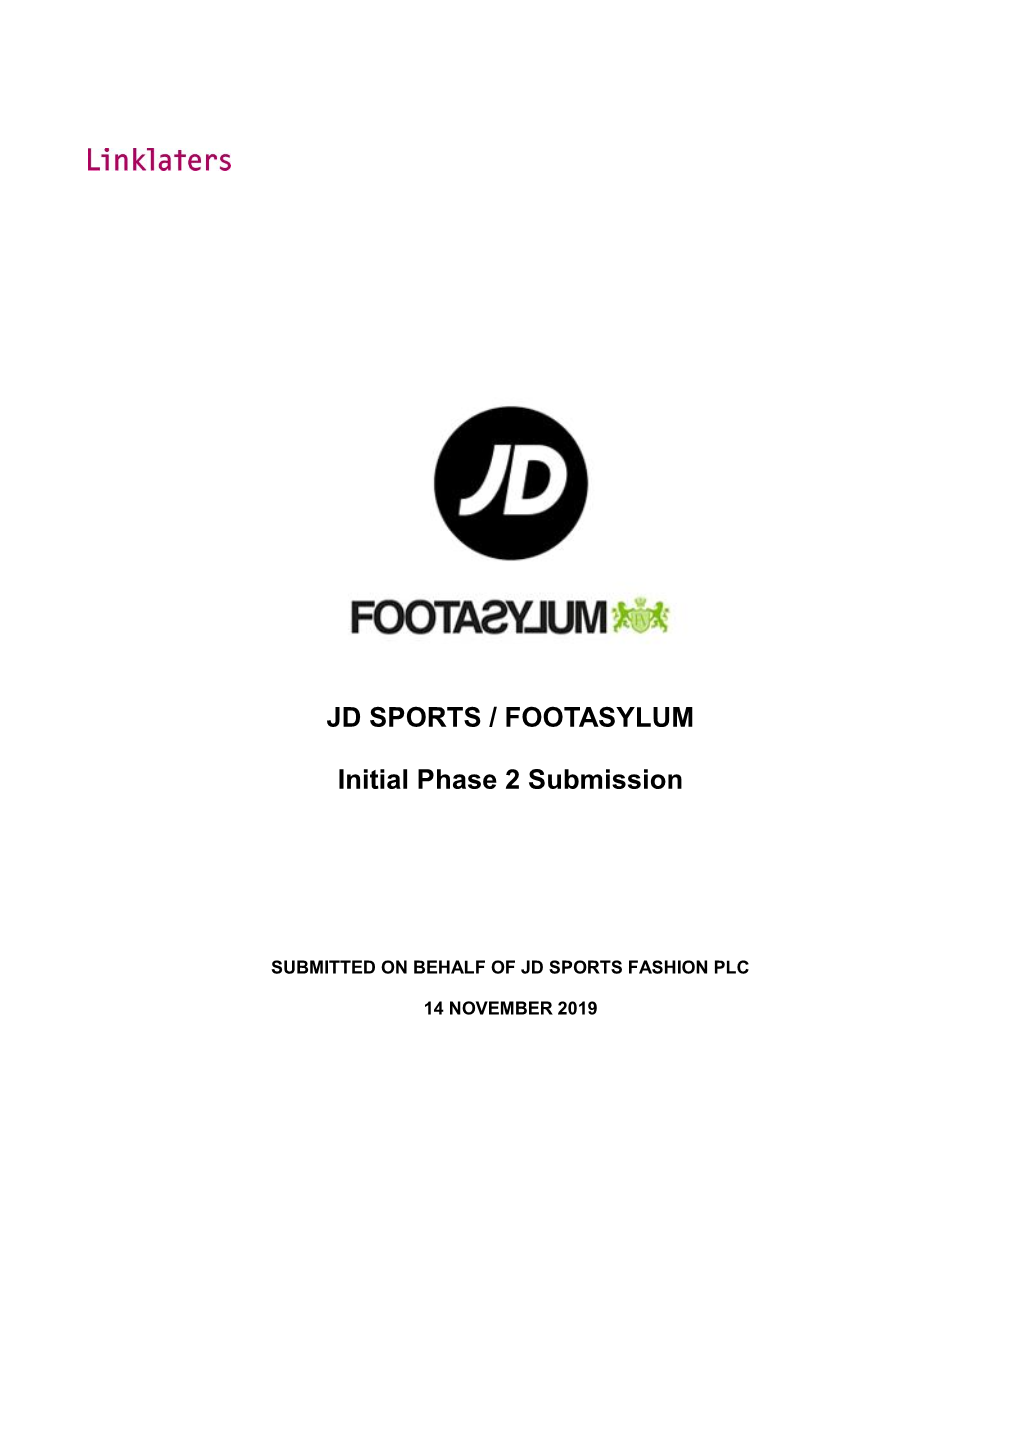 JD SPORTS / FOOTASYLUM Initial Phase 2 Submission